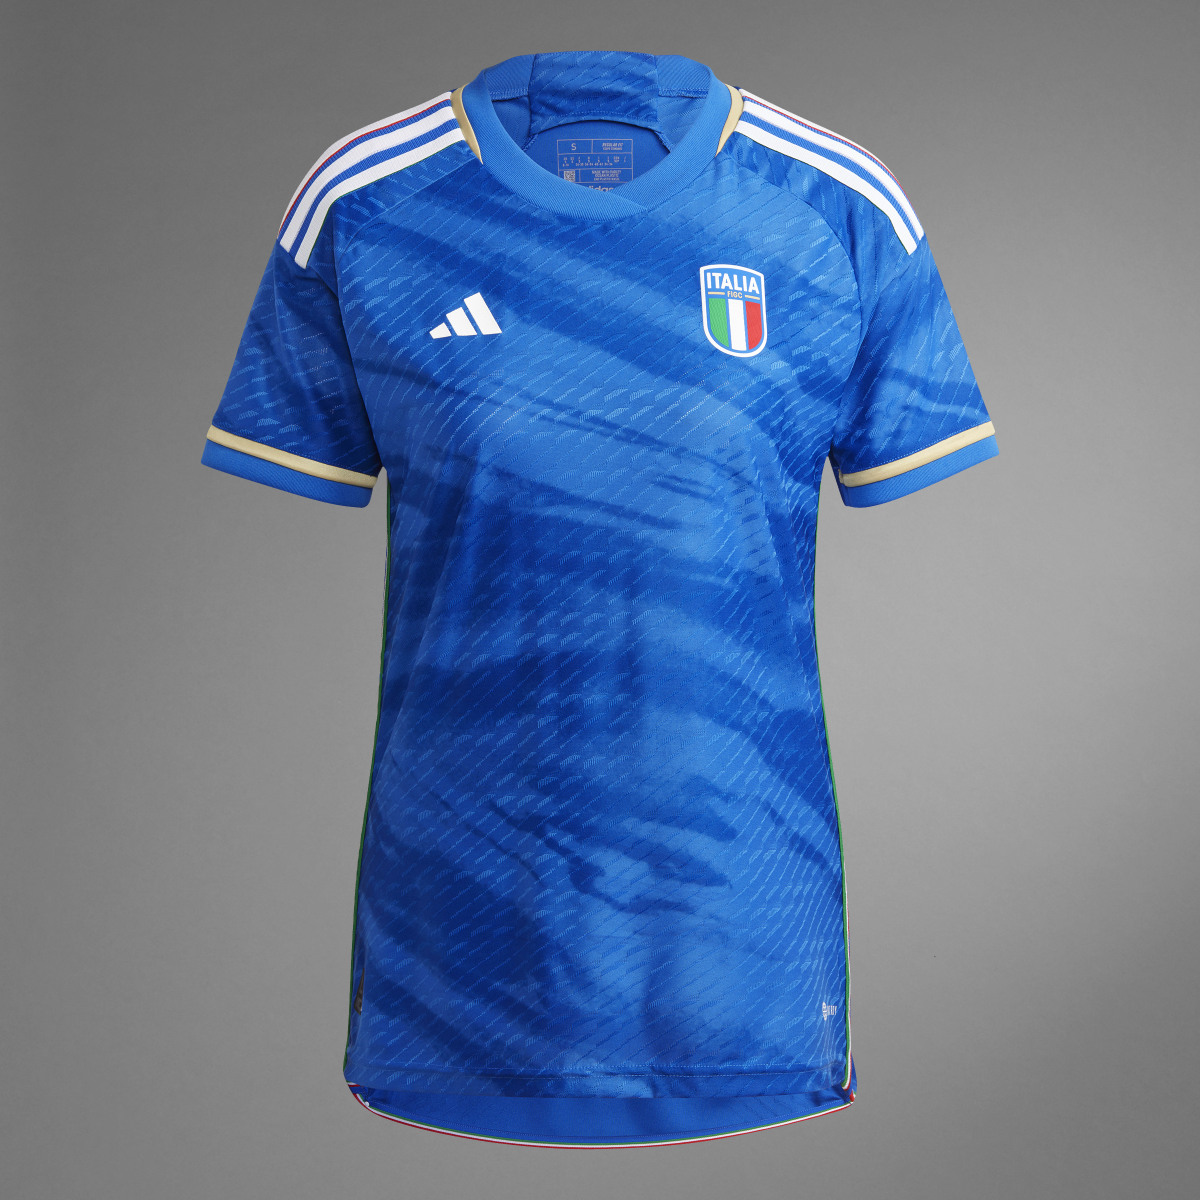 Adidas Italy Women's Team 23 Home Authentic Jersey. 11